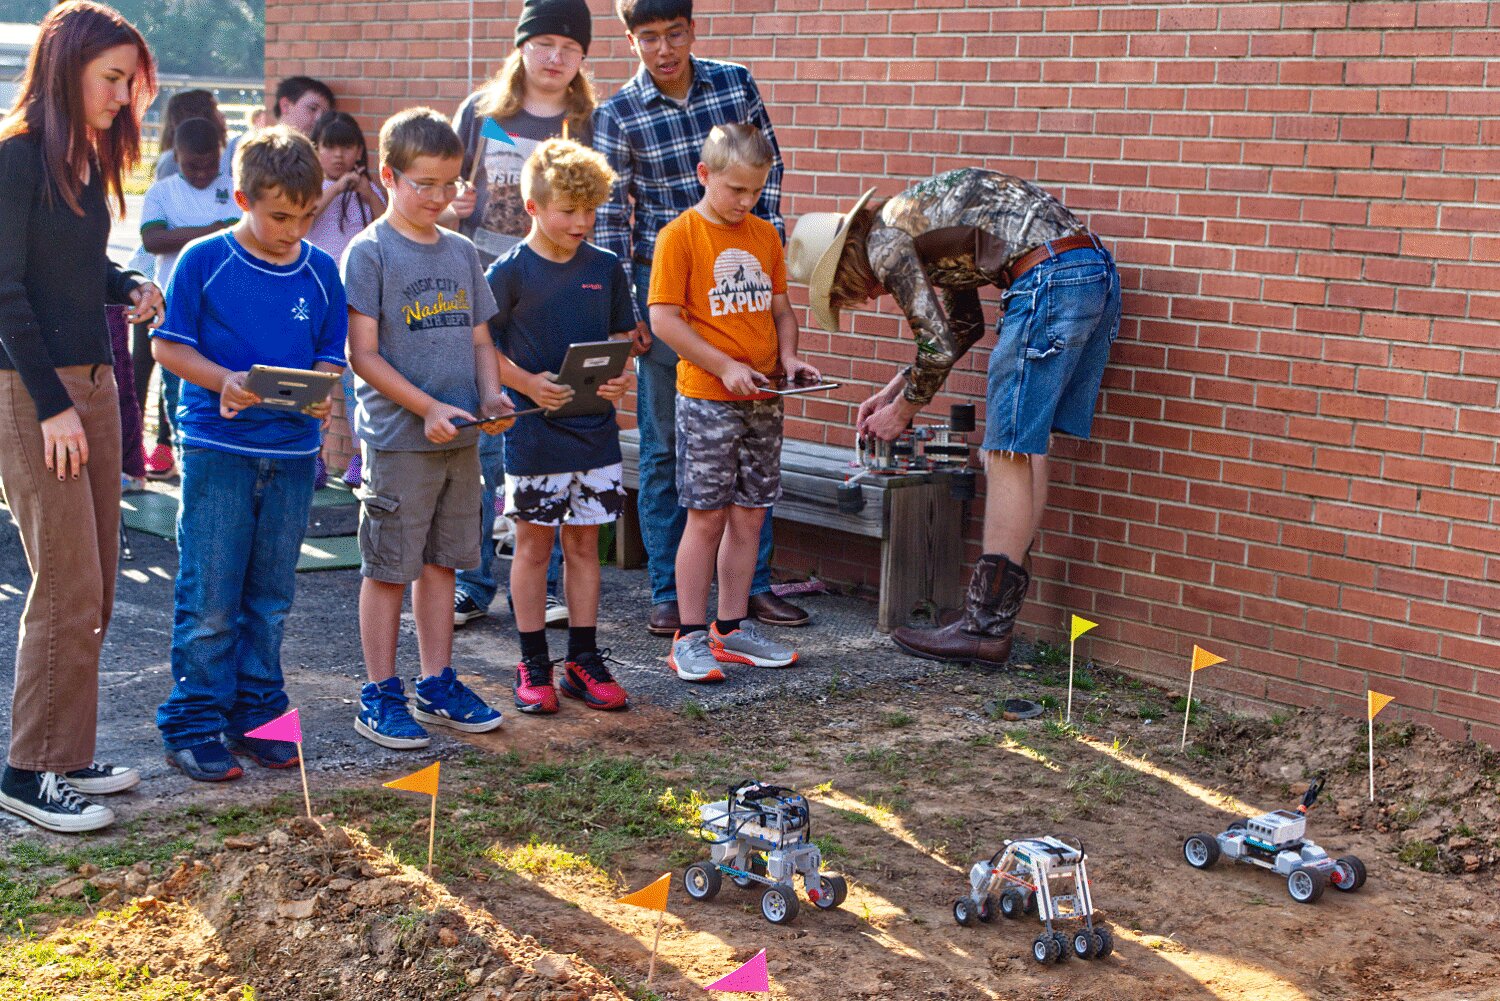 Students race robot vehicles over a course during the annual Science Extravaganza Friday morning at Mineola Elementary School. Some 19 outdoor and 17 indoor exhibits were set up.